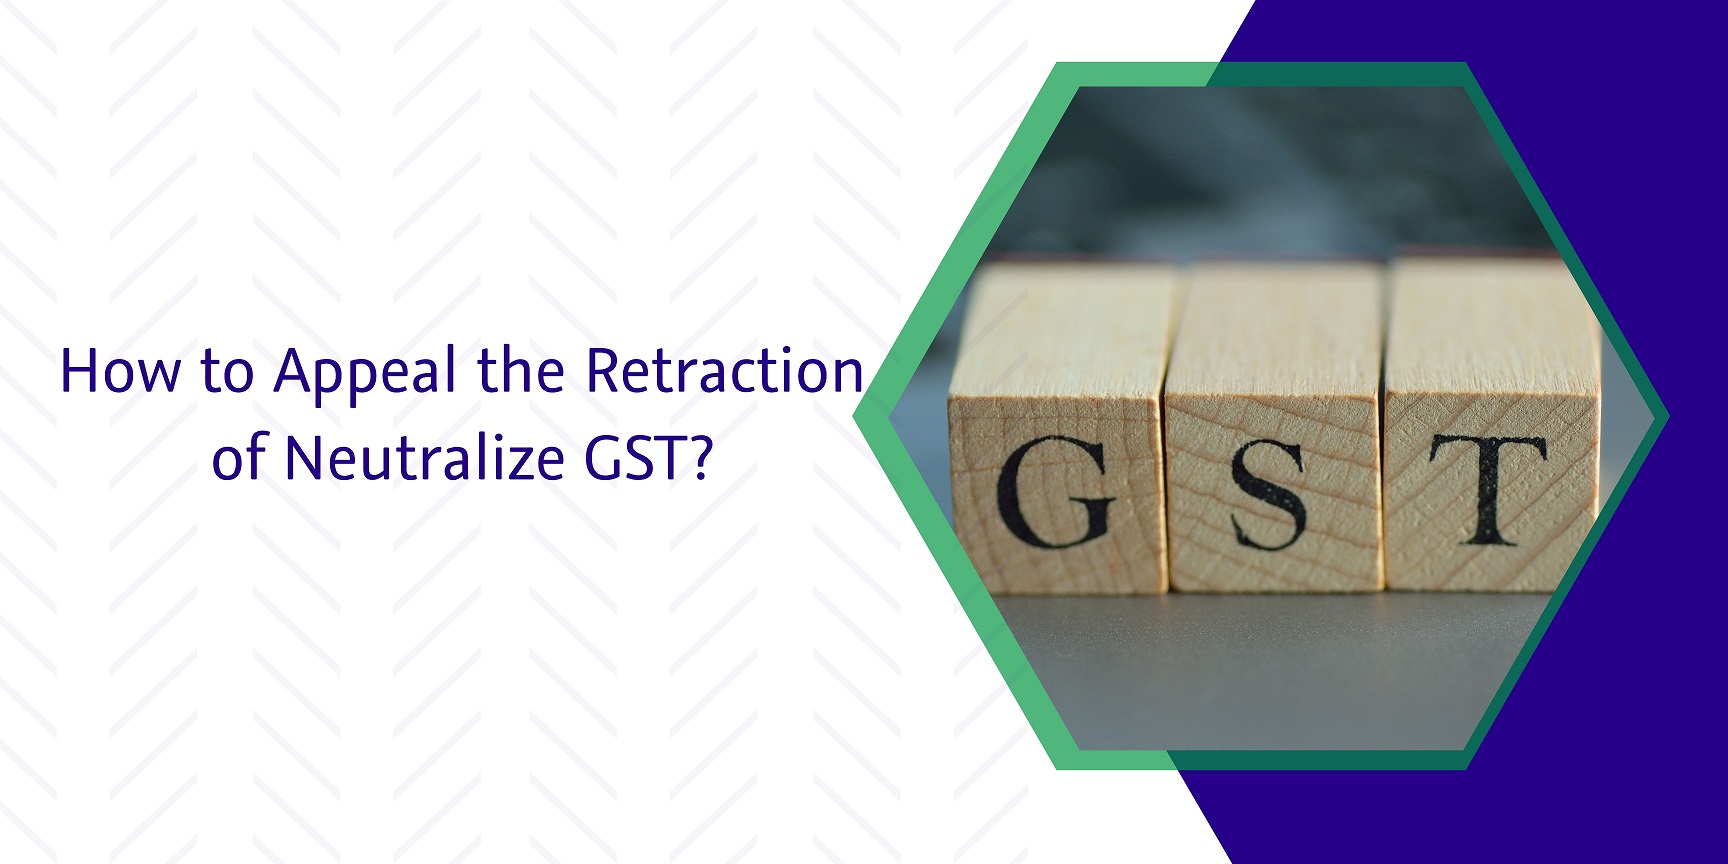 CaptainBiz: How to Appeal the Retraction of Neutralize GST